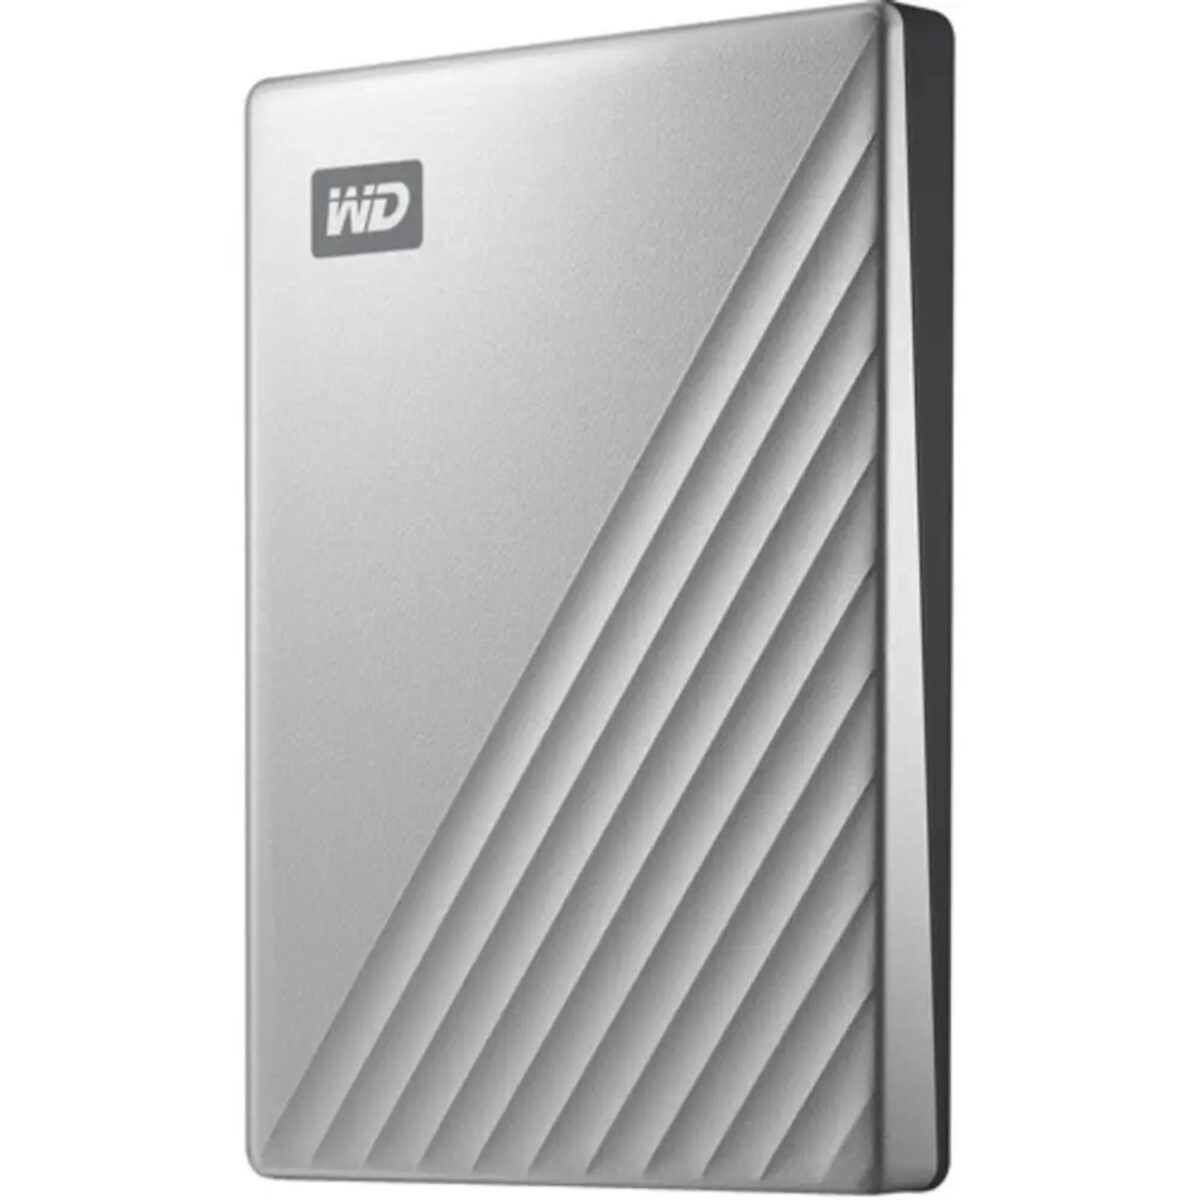 WD 1TB My Passport Ultra Silver Portable External Hard Drive HDD, USB-C and USB 3.1 Compatible (WDBC3C0010BSL-WE)